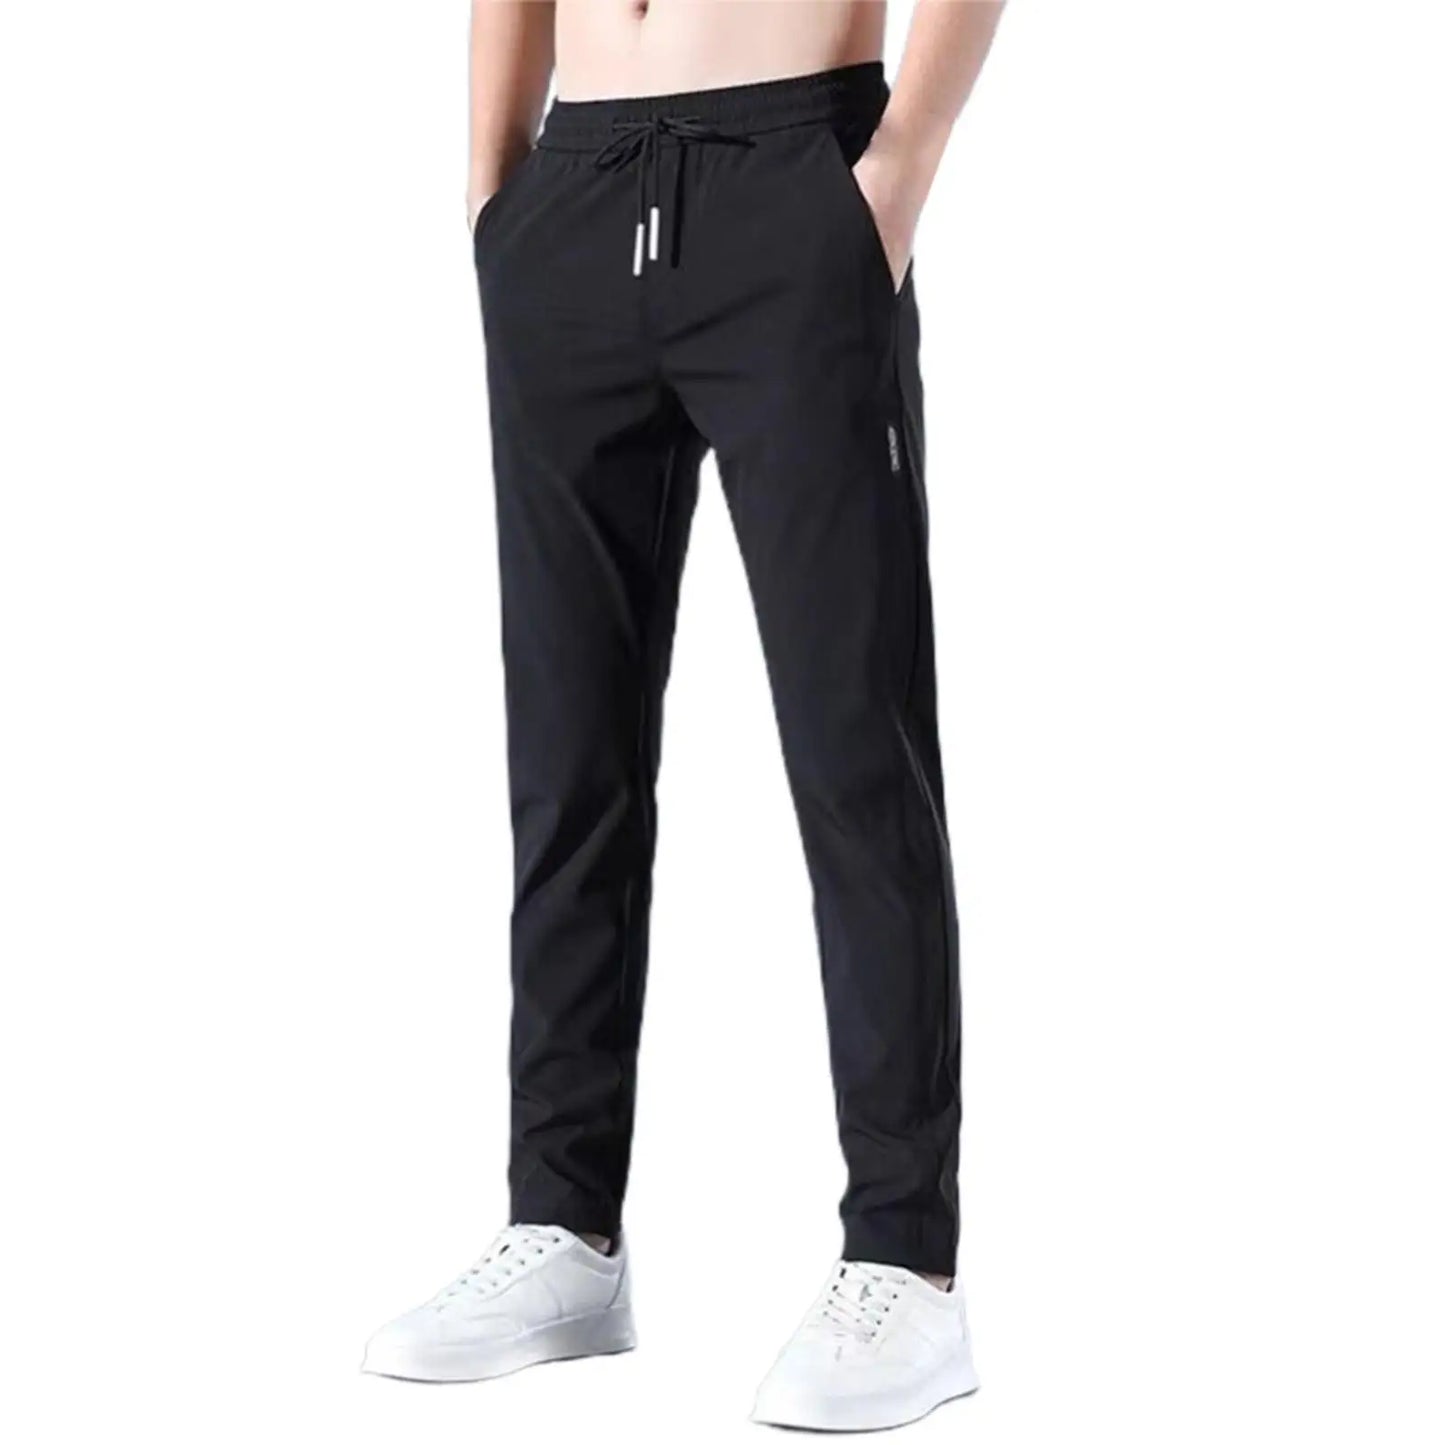 New Jogger Sweatpants Men Drawstring Trousers Casual Comfortable Tracksuits Plus Size Gym Pants Fast Dry Stretch Sweatpants